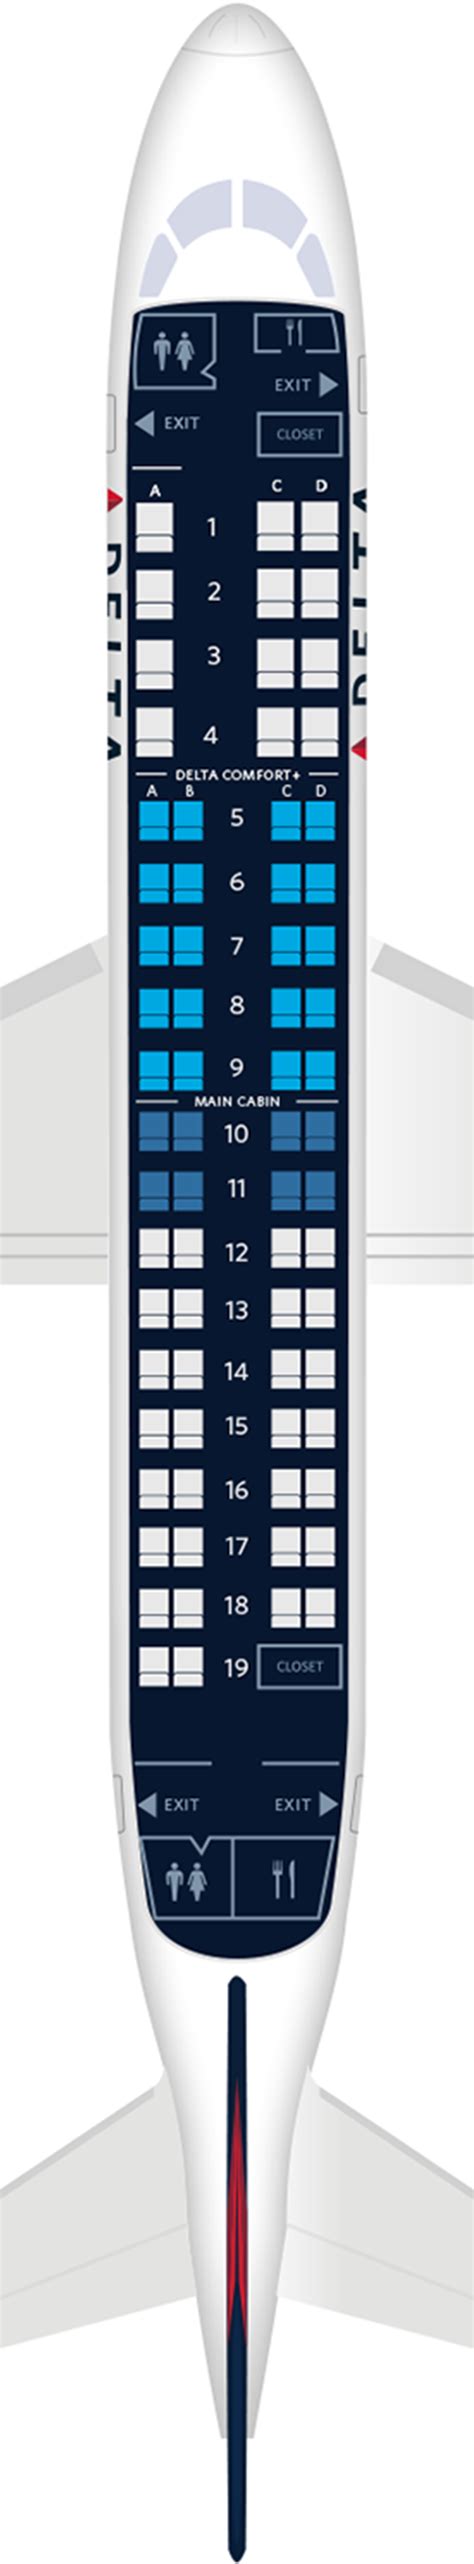 Seat map embraer 175. Delta Airlines Embraer 175 Class Tono Ancho asientos First Class 37 20 12 Economy Class 31 18.2 52 Economy Comfort Class 34 18.2 12 Powered by TCPDF (www.tcpdf.org) 